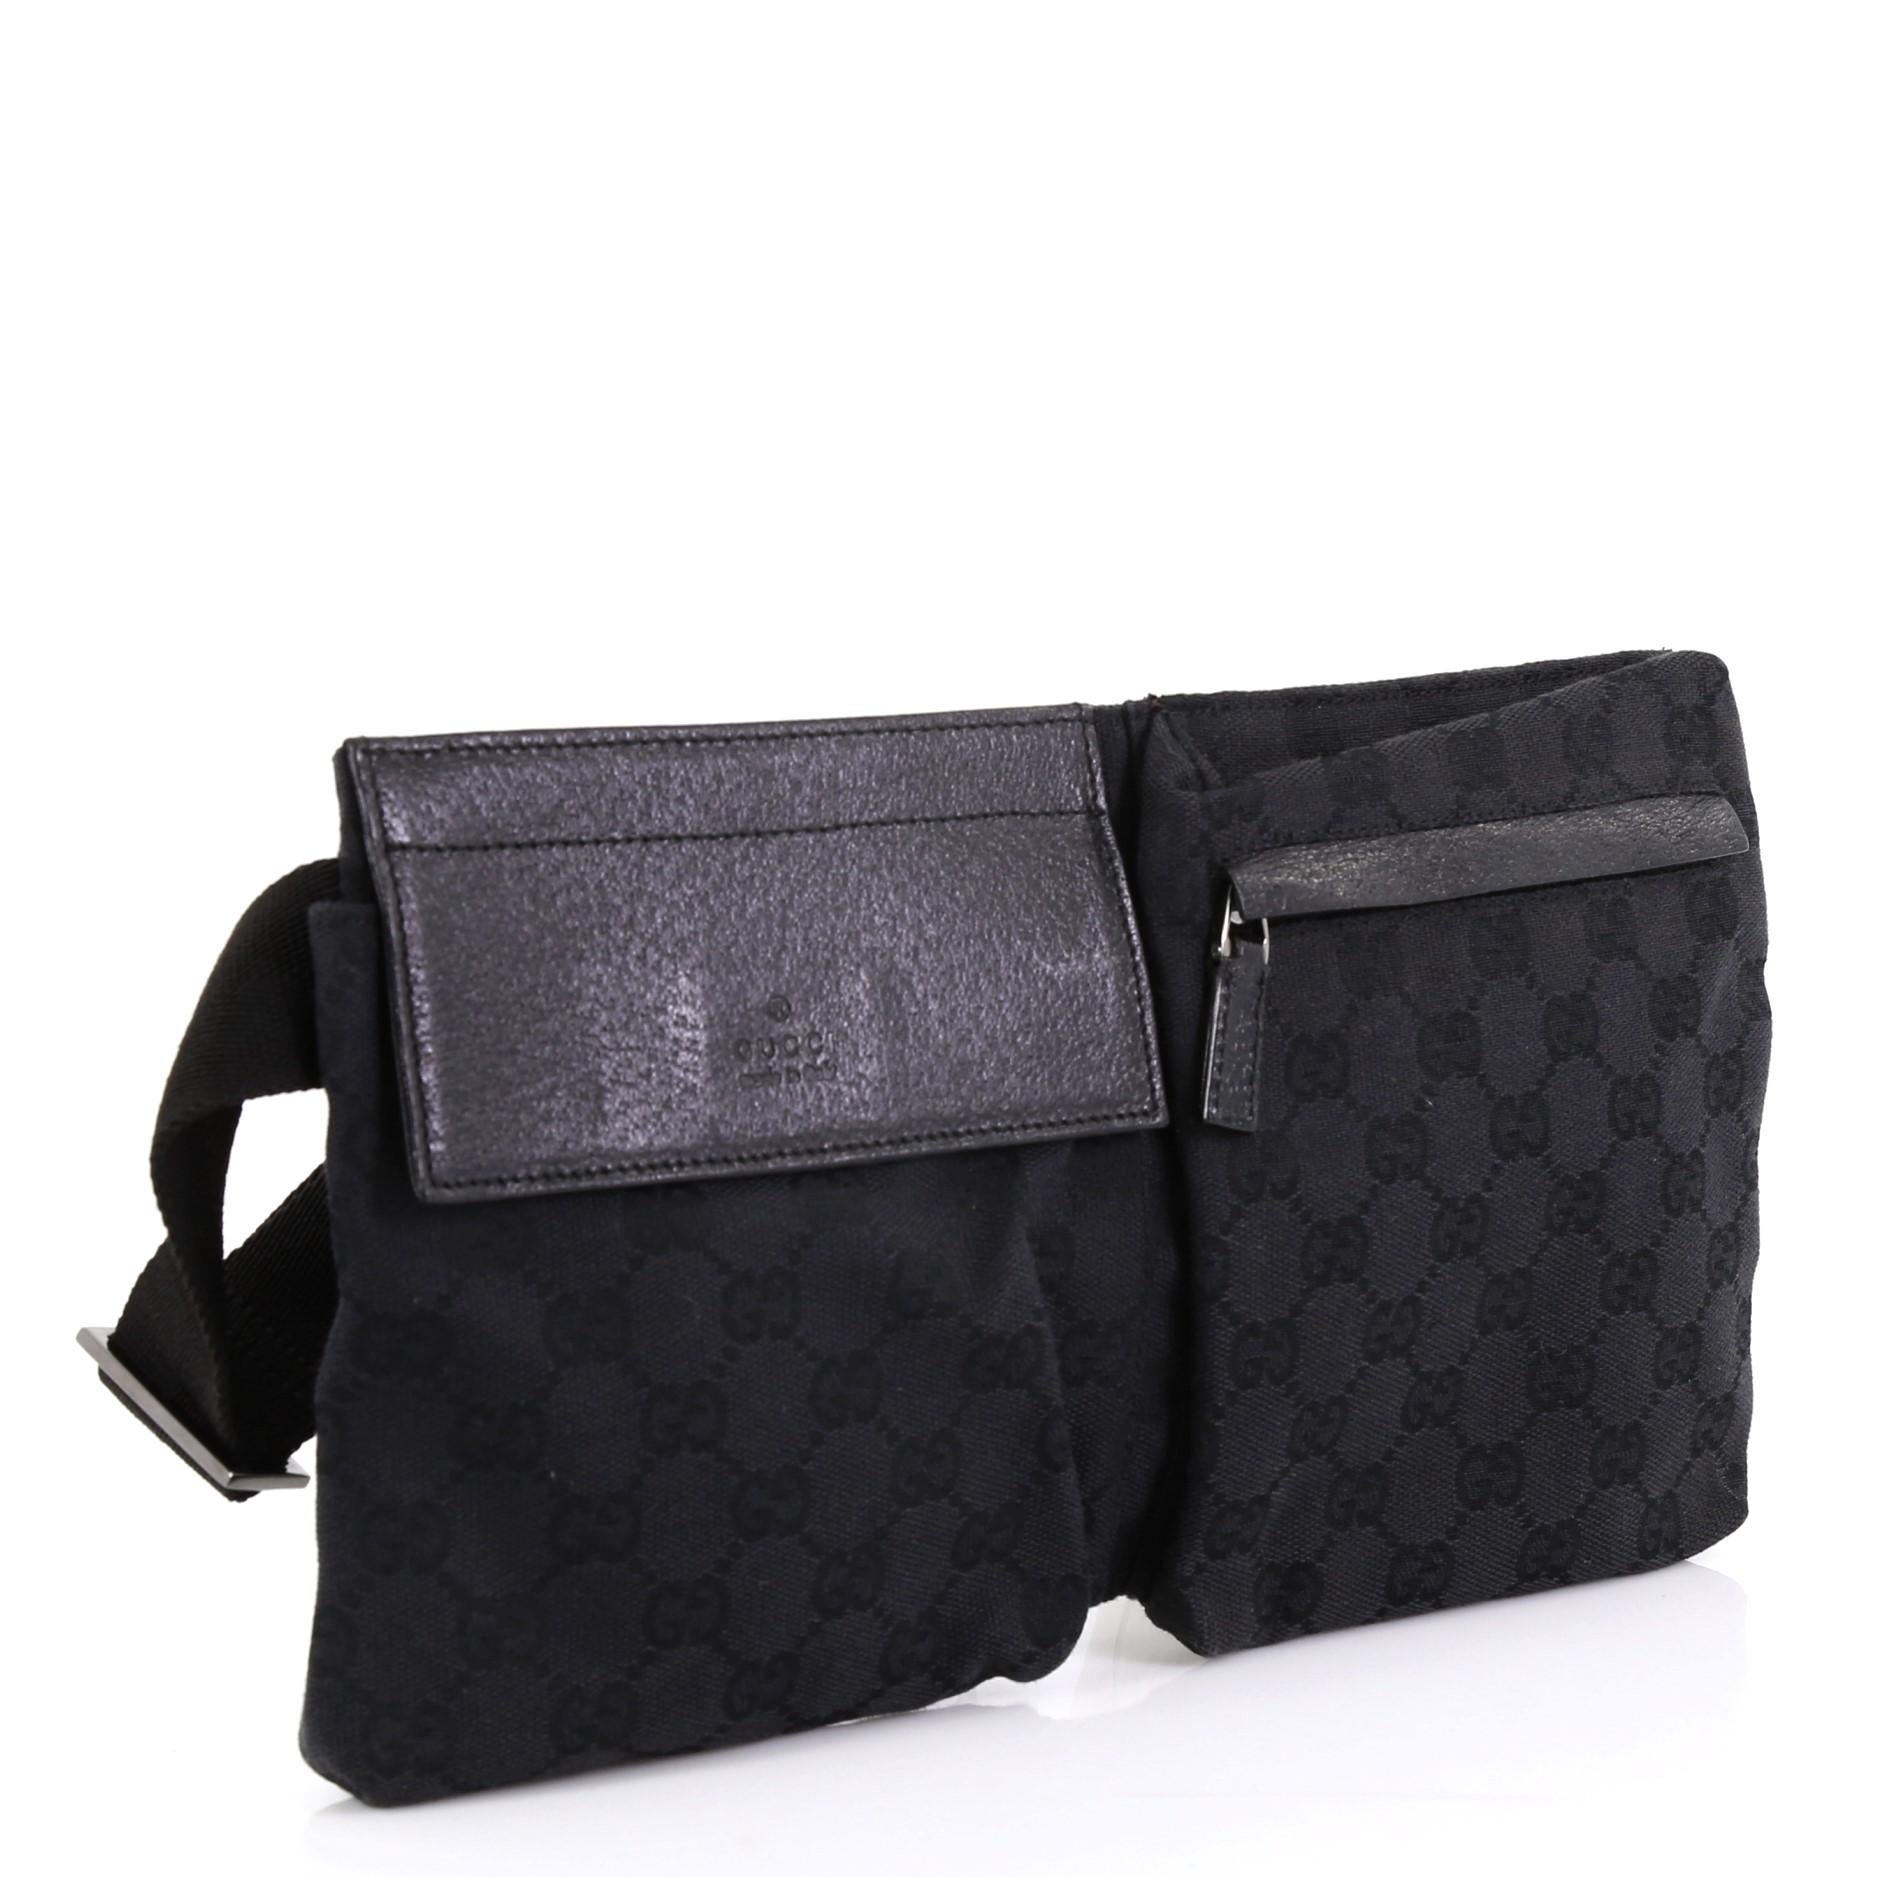 This Gucci Vintage Double Belt Bag GG Canvas, crafted in black GG canvas and leather, features an adjustable textile strap, front zip and snap pockets, and gunmetal-tone hardware. Its zip closure opens to a black fabric interior. 

Condition: Great.